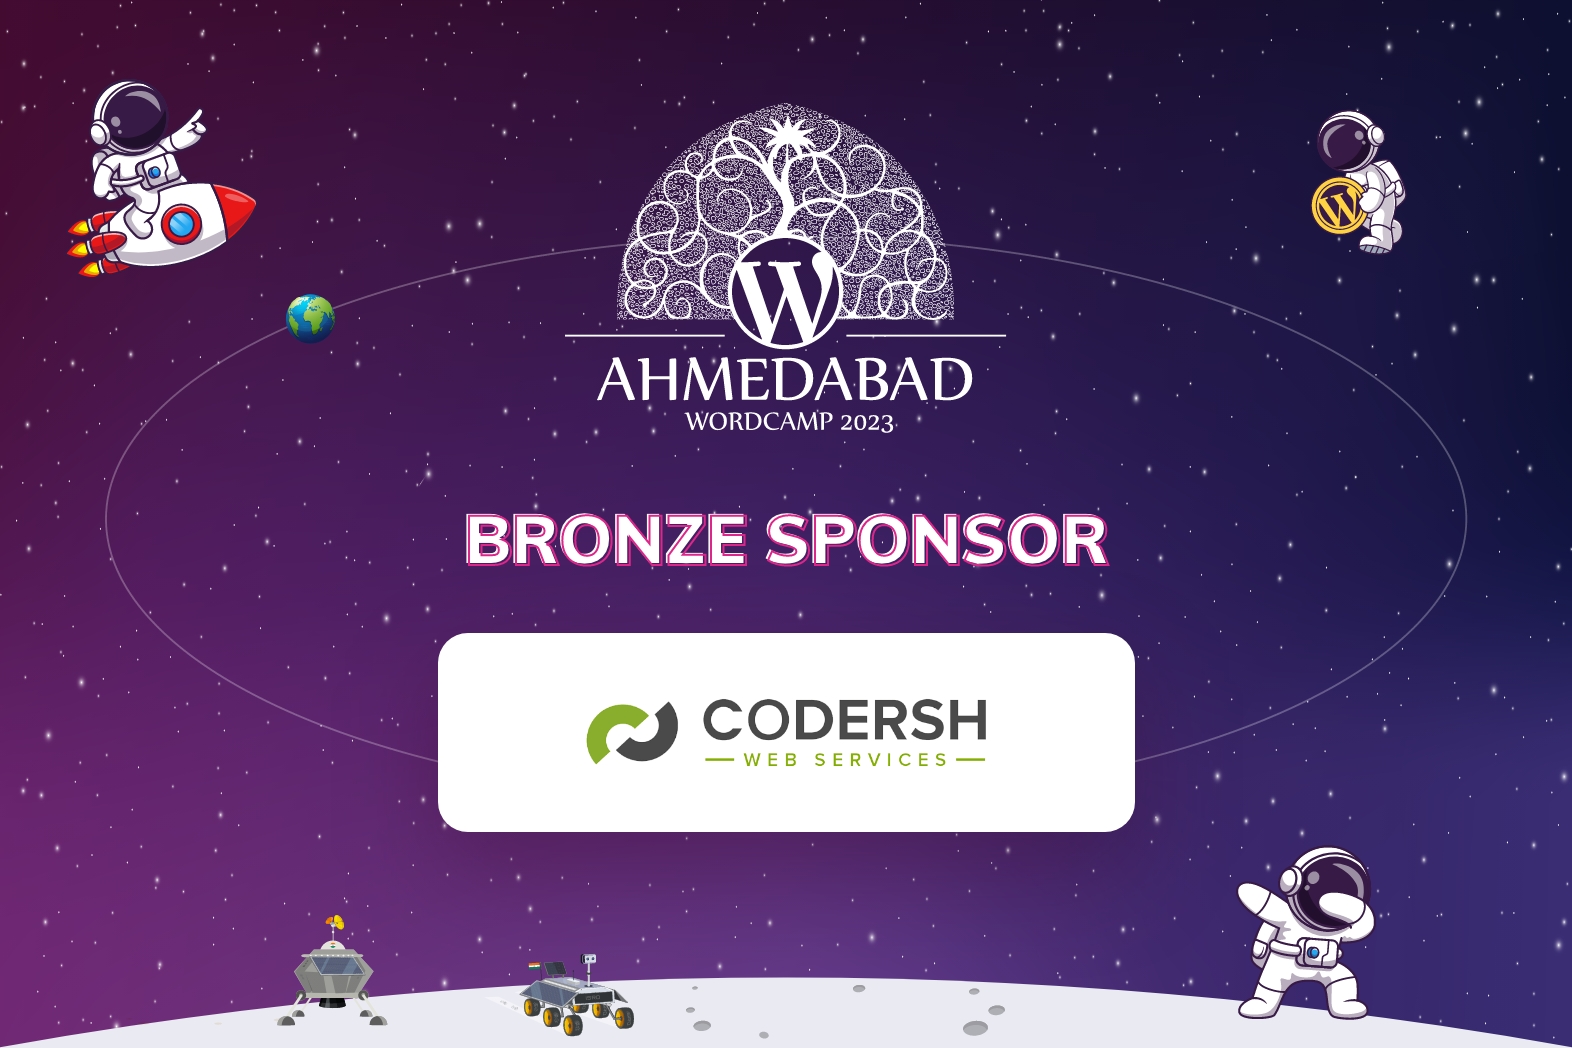 Thank You Codersh Web Services, for being our Bronze Sponsor